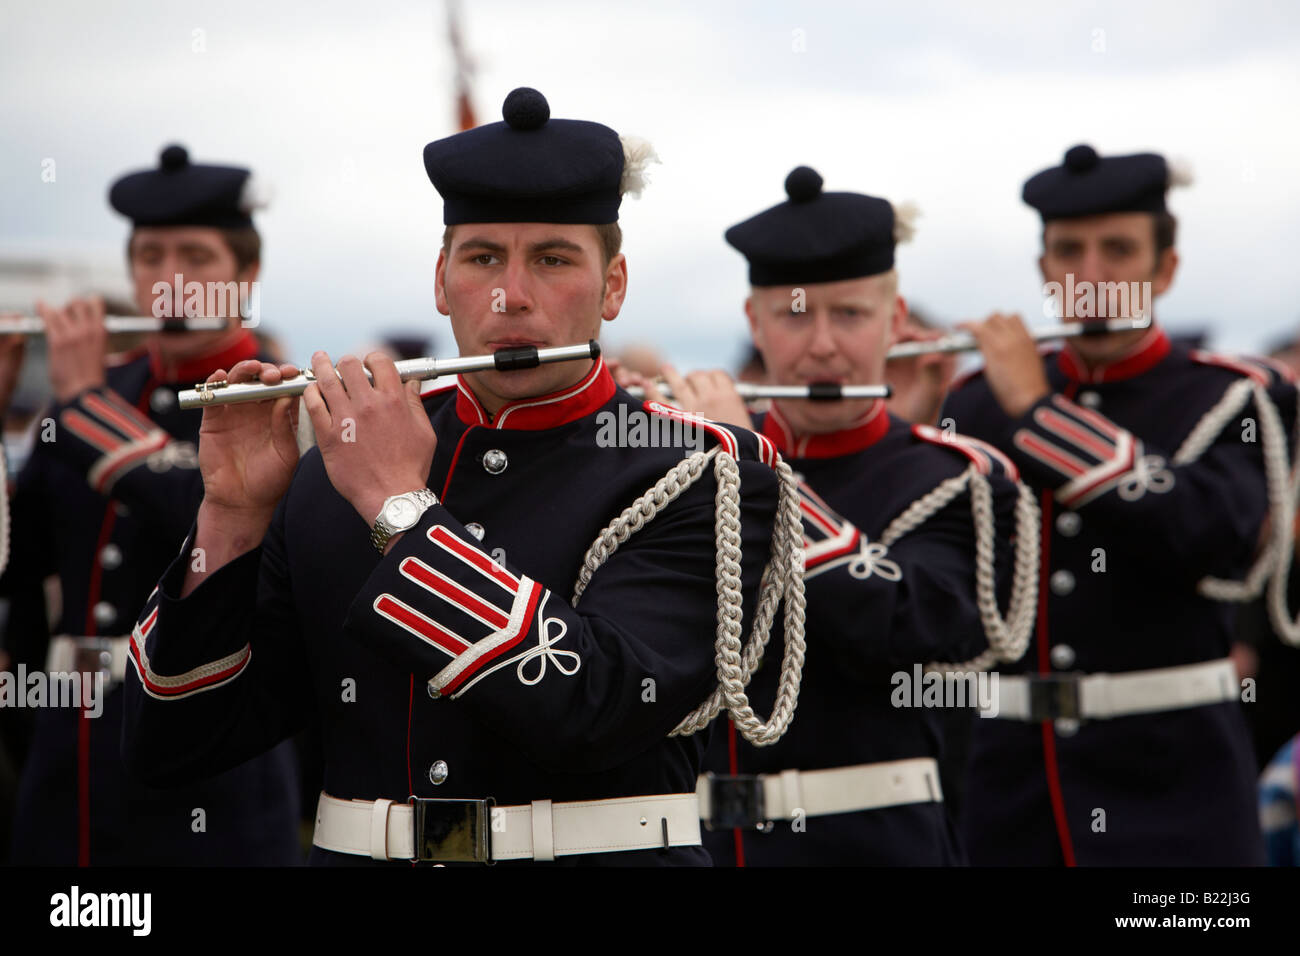 members of a loyalist flute band perform during 12th July Orangefest celebrations in Dromara county down northern ireland Stock Photo